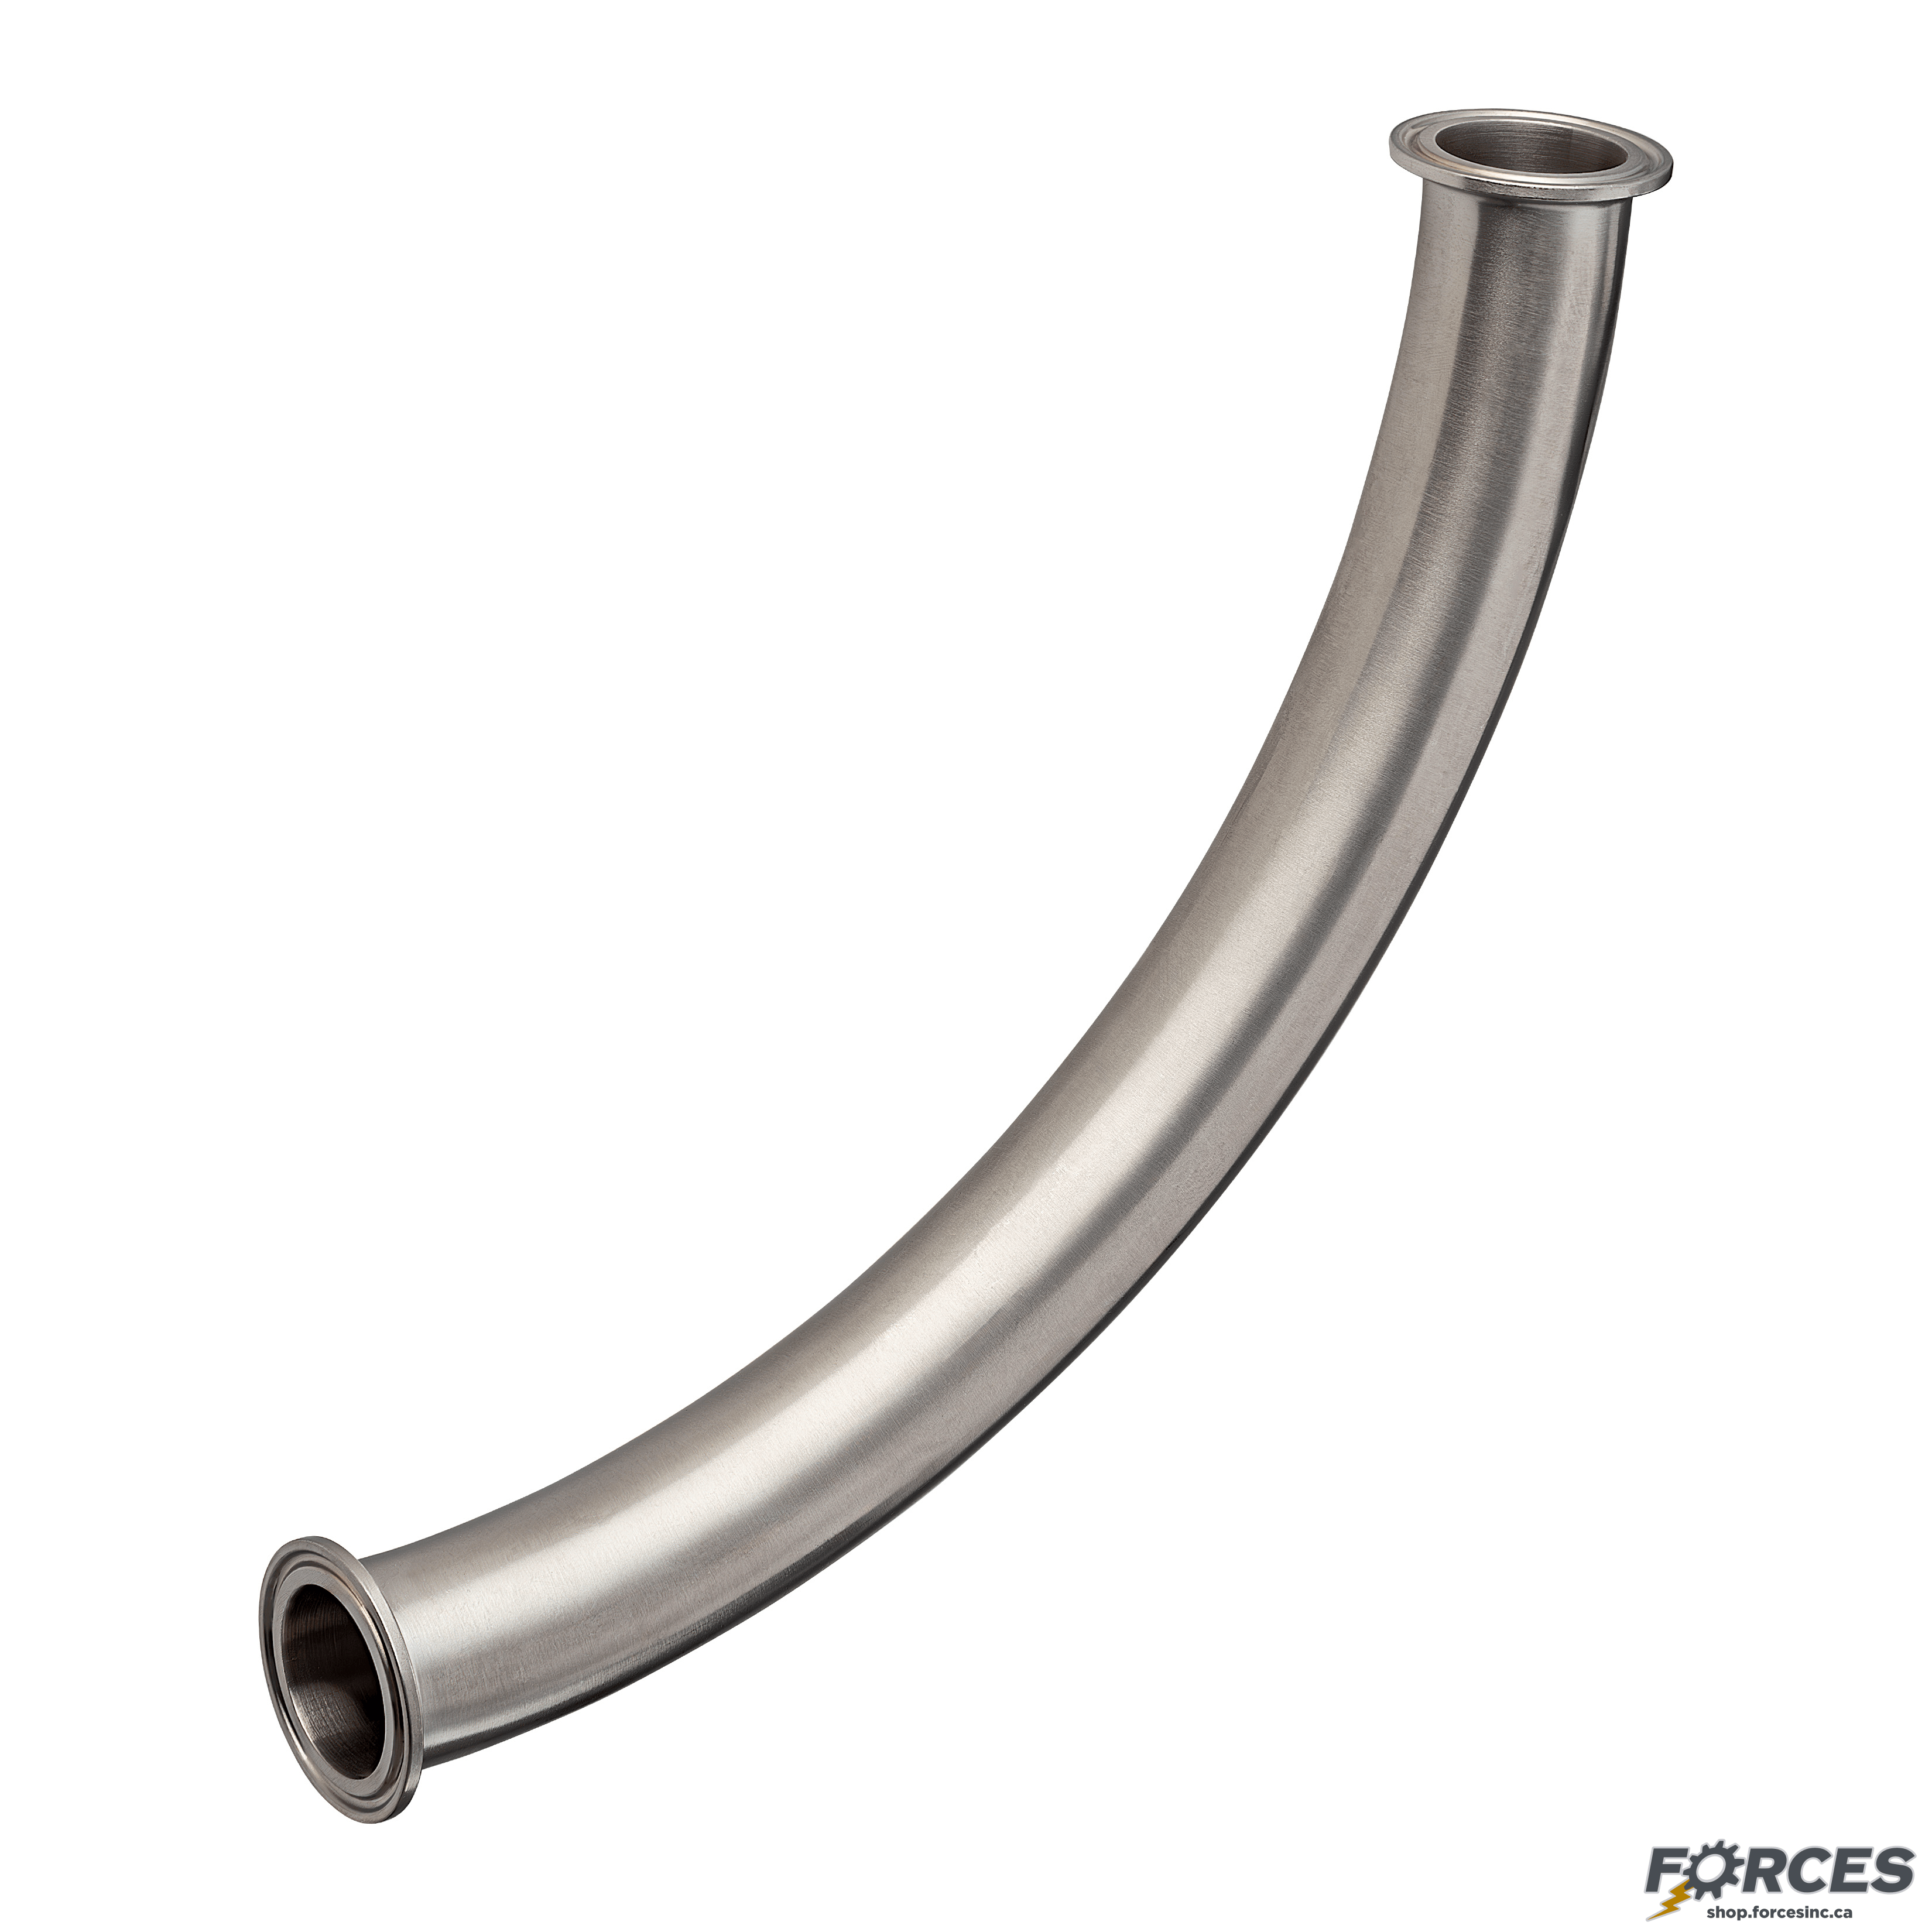 1-1/2" x 9" Tri-Clamp 90° Elbow Long Radius - Stainless Steel 304 - Forces Inc